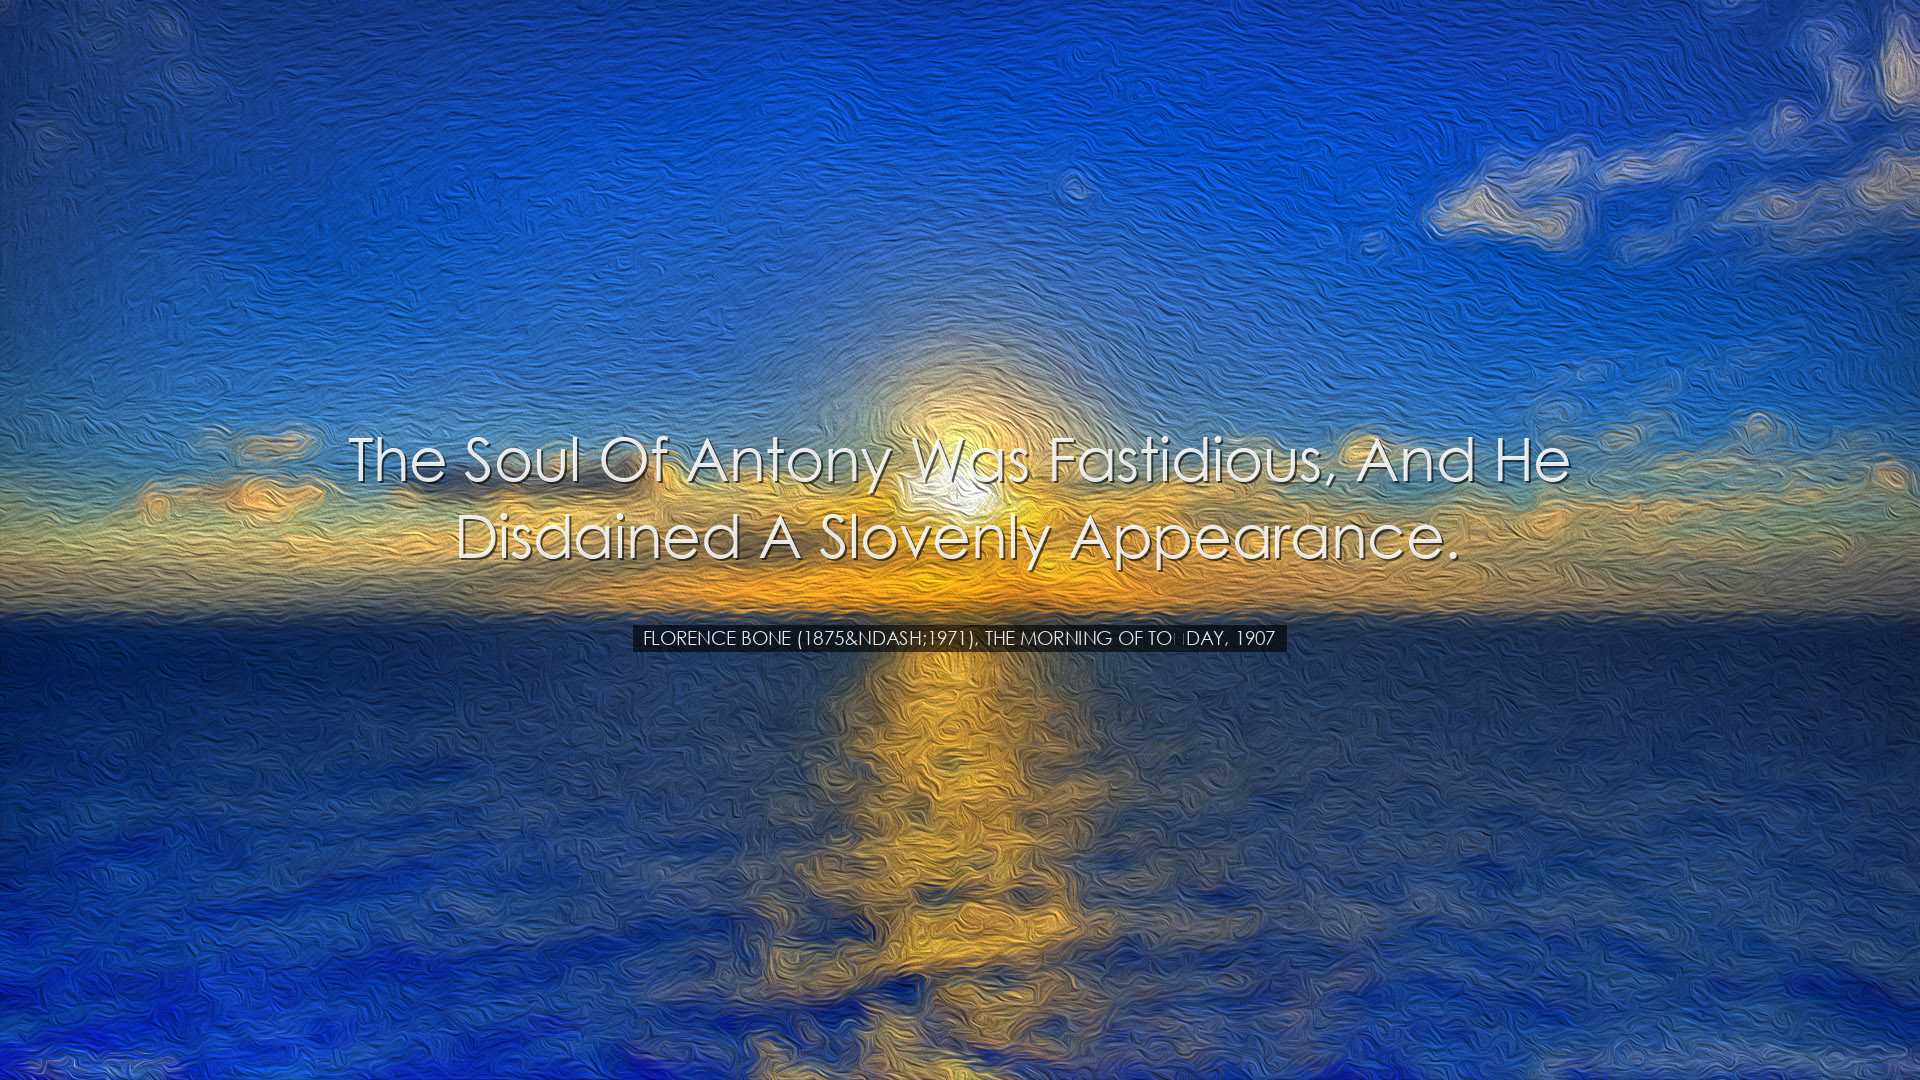 The soul of Antony was fastidious, and he disdained a slovenly app